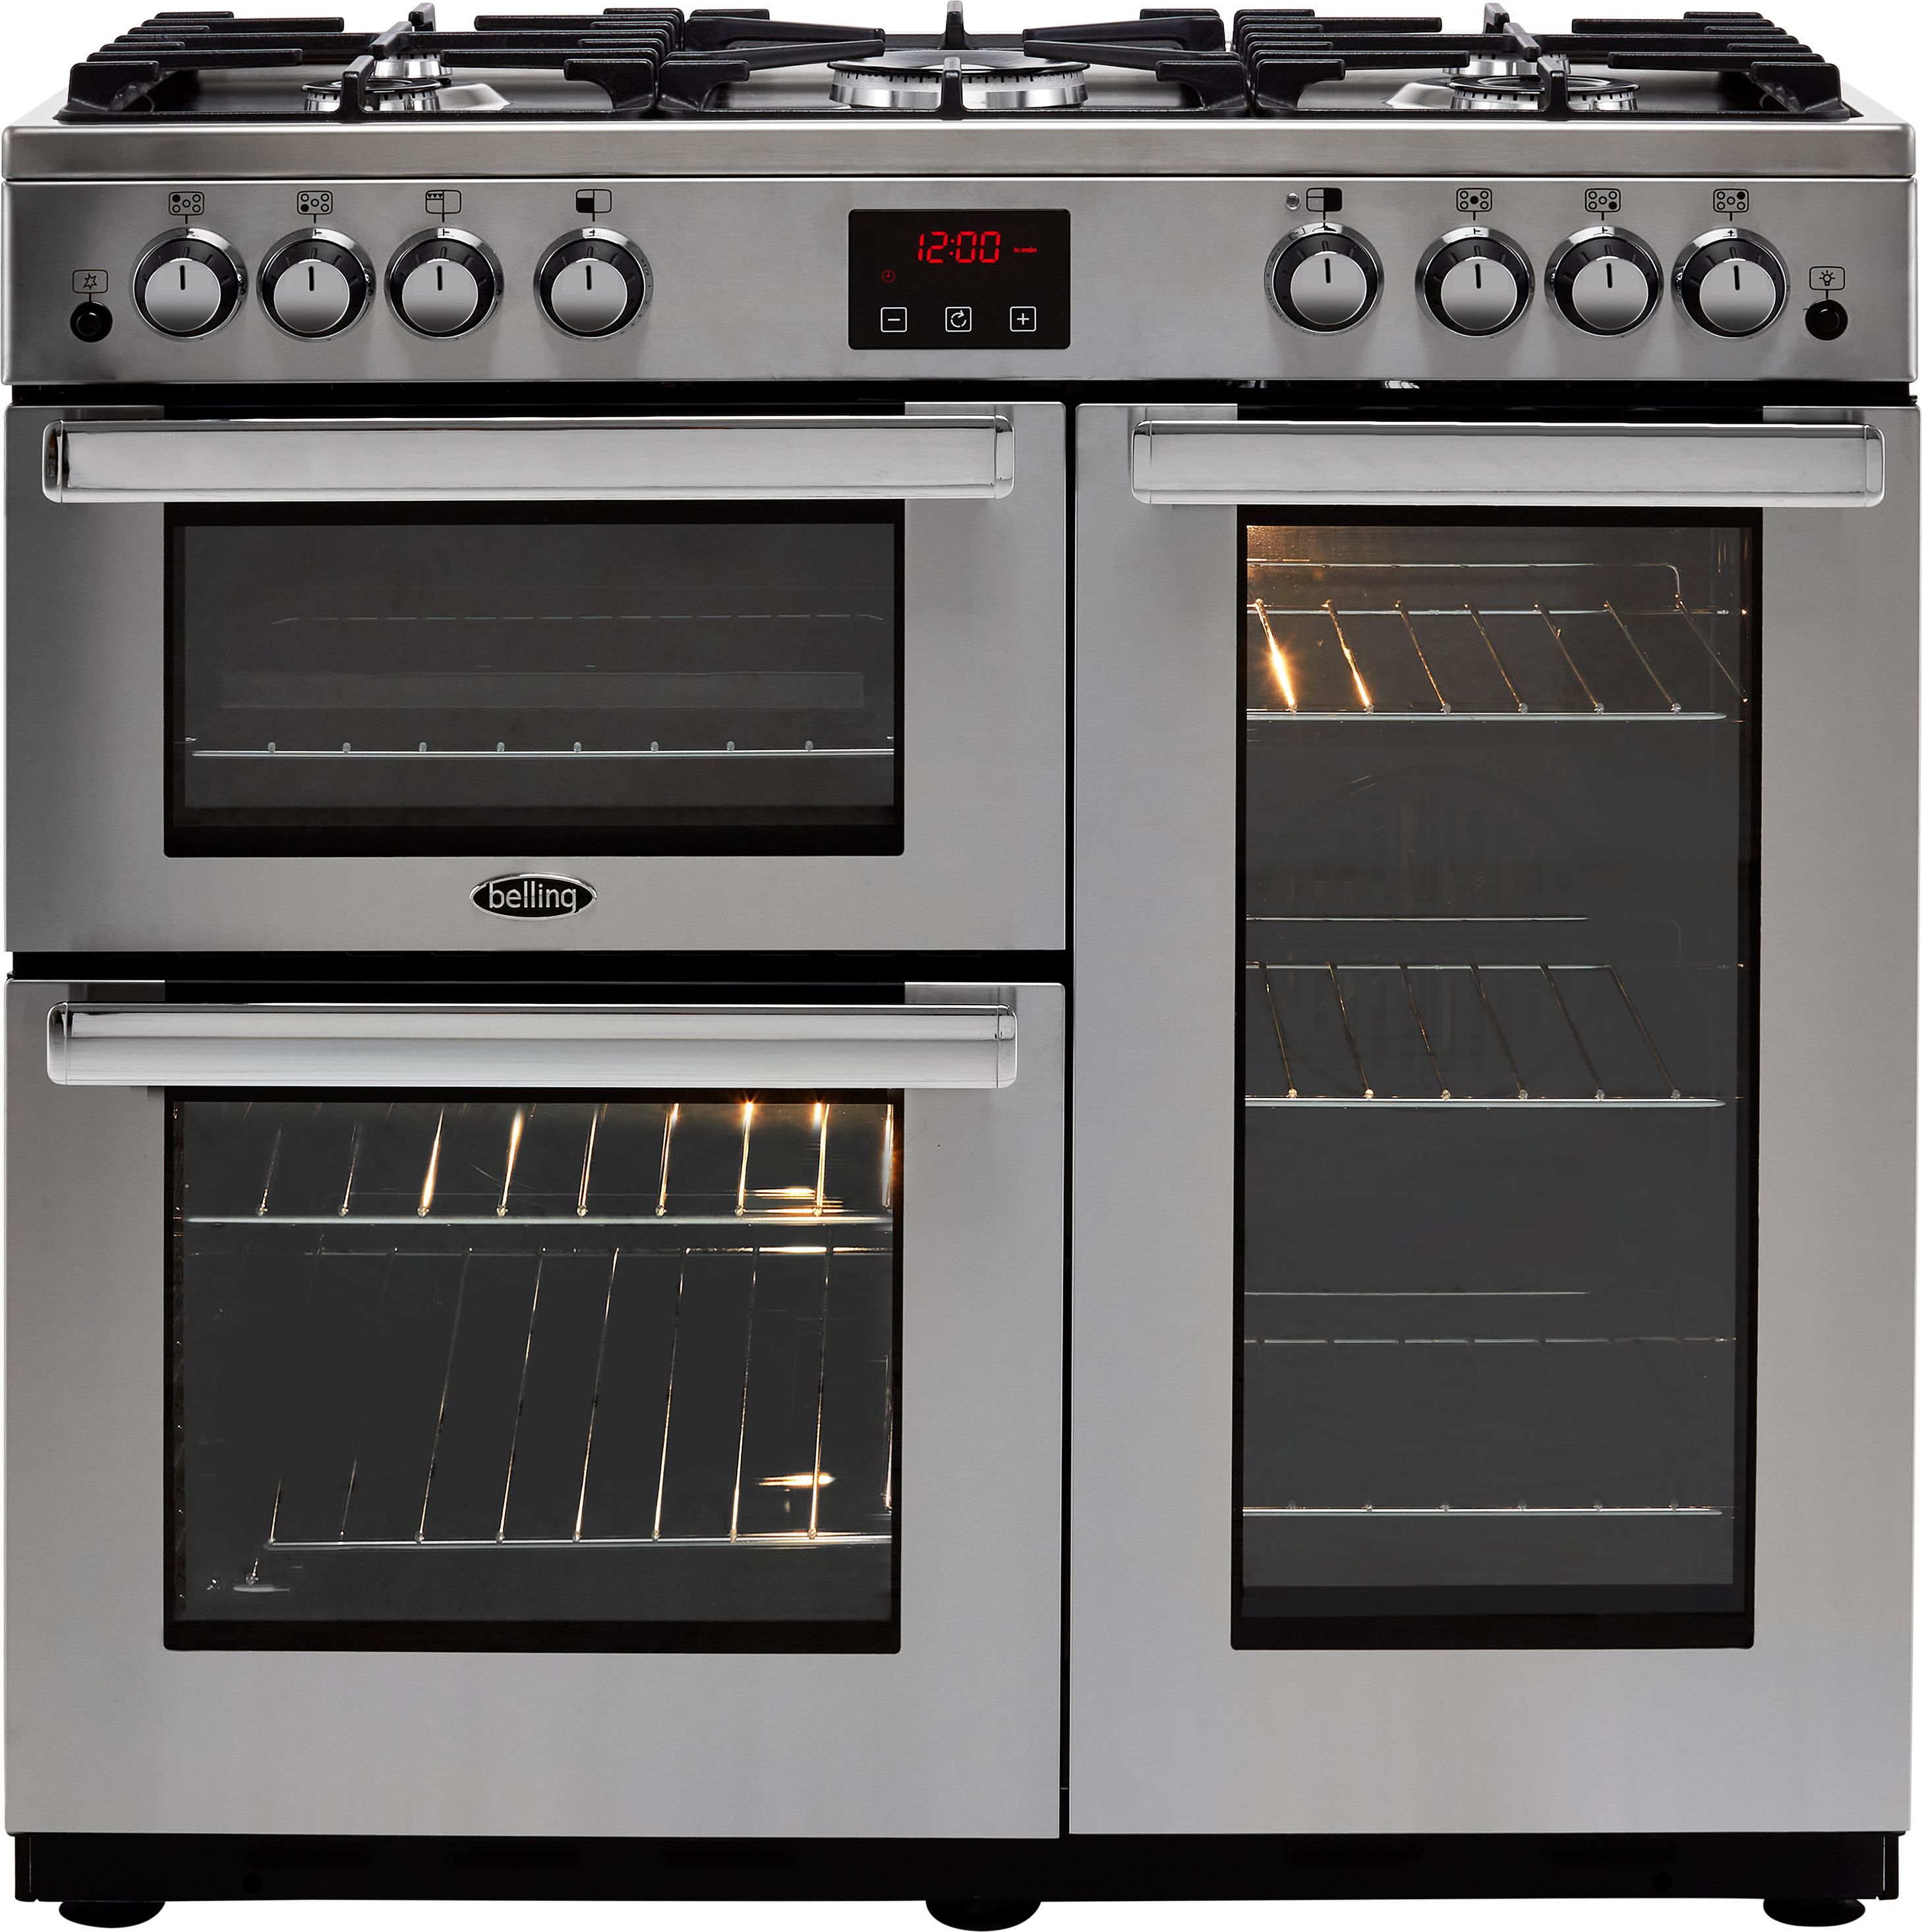 Belling CookcentreX90GProf 90cm Gas Range Cooker with Electric Fan Oven - Stainless Steel - A/A Rated, Stainless Steel